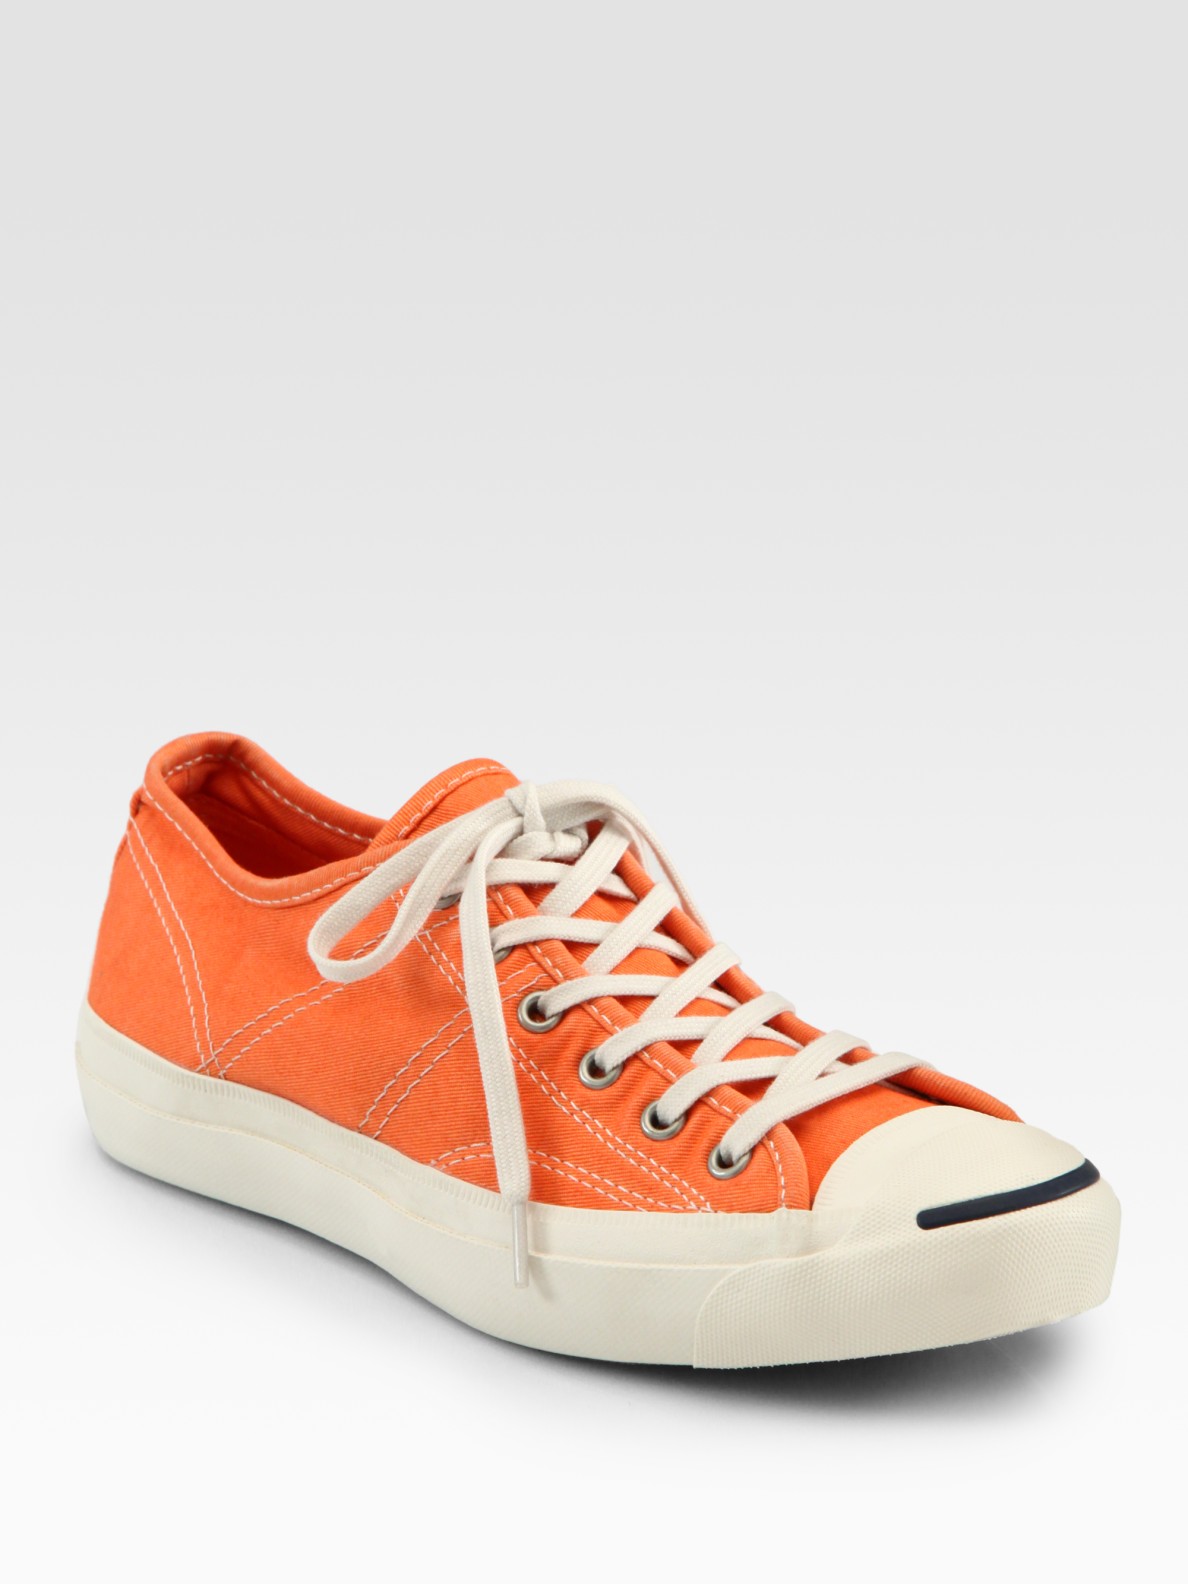 Converse Lux Jack Purcell Laceup Sneakers in Orange Lyst